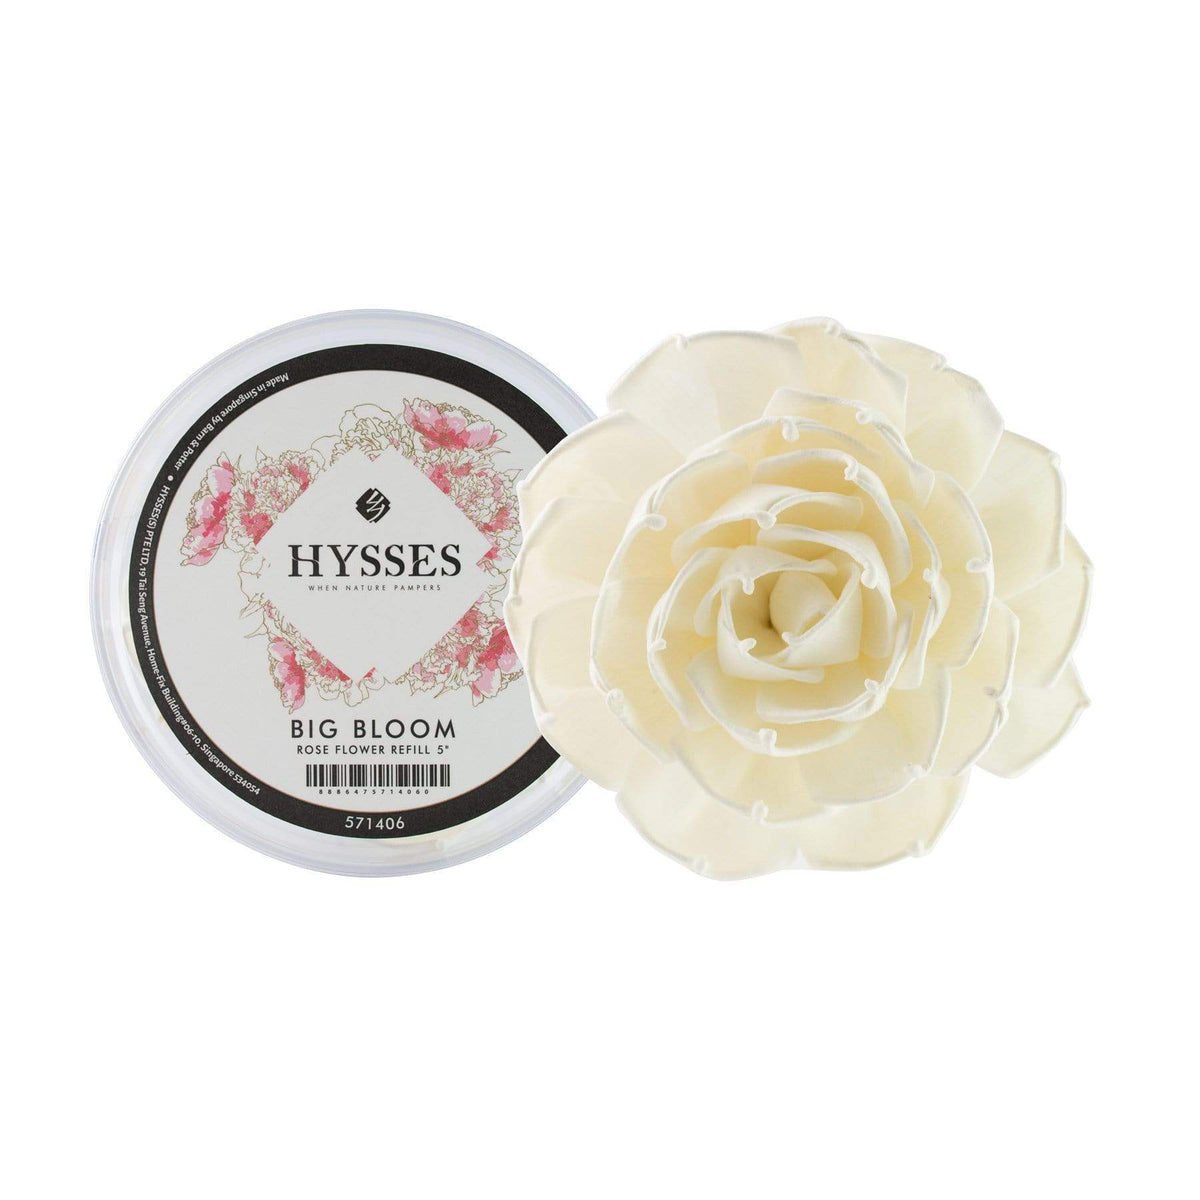 HYSSES Home Scents Solar Flower Diffuser Refill - Rose